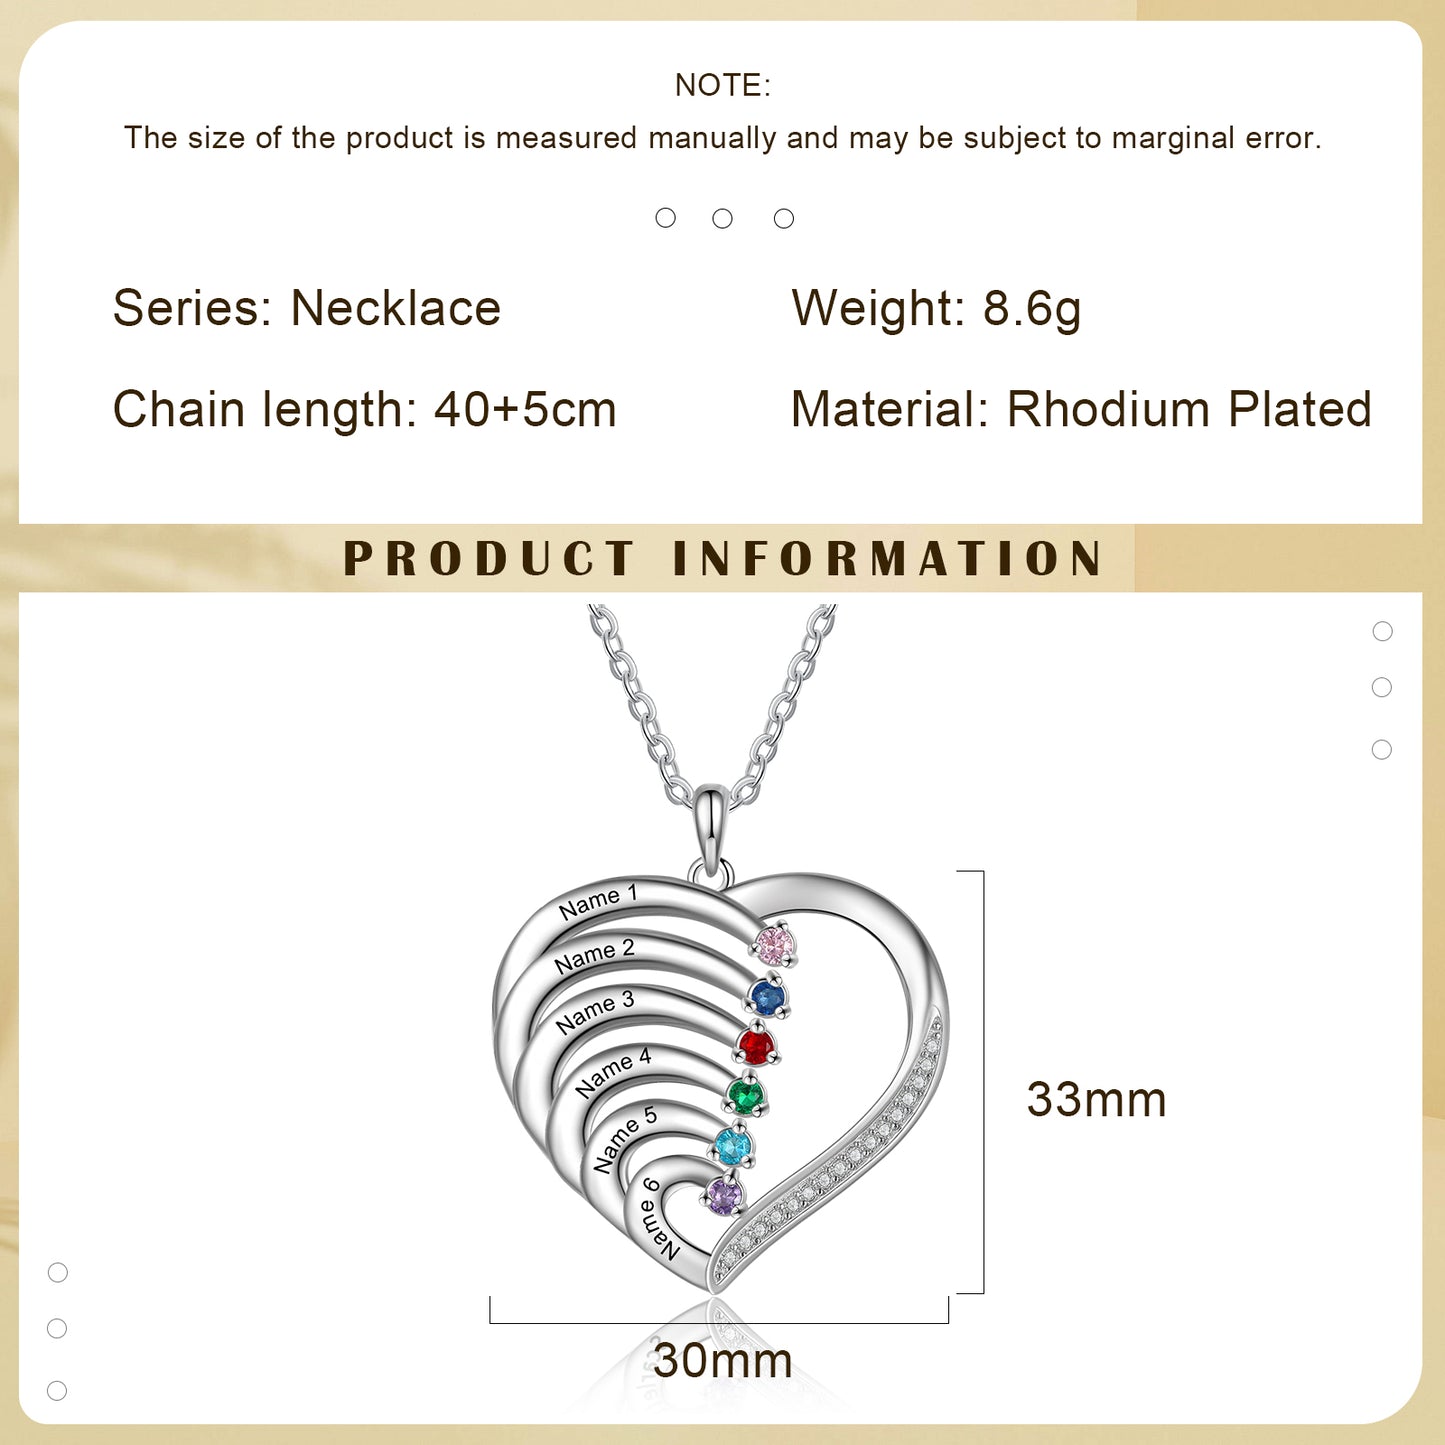 Heart of Family Birthstone Necklace